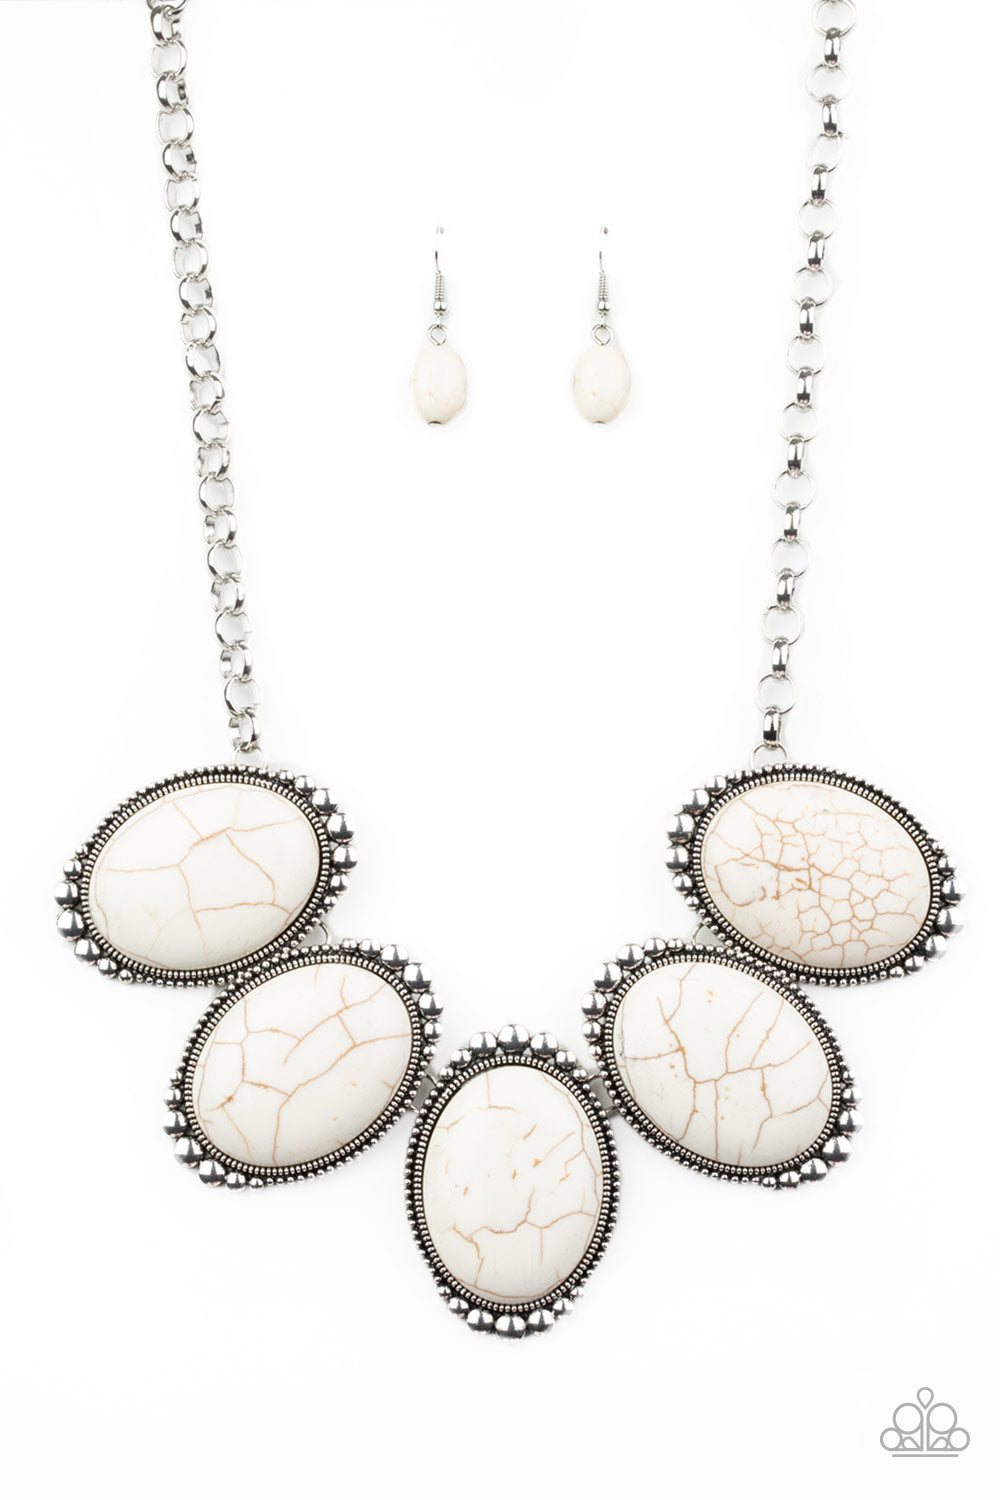 Paparazzi Prairie Goddess - White Stones - Necklace and matching Earrings - $5 Jewelry with Ashley Swint